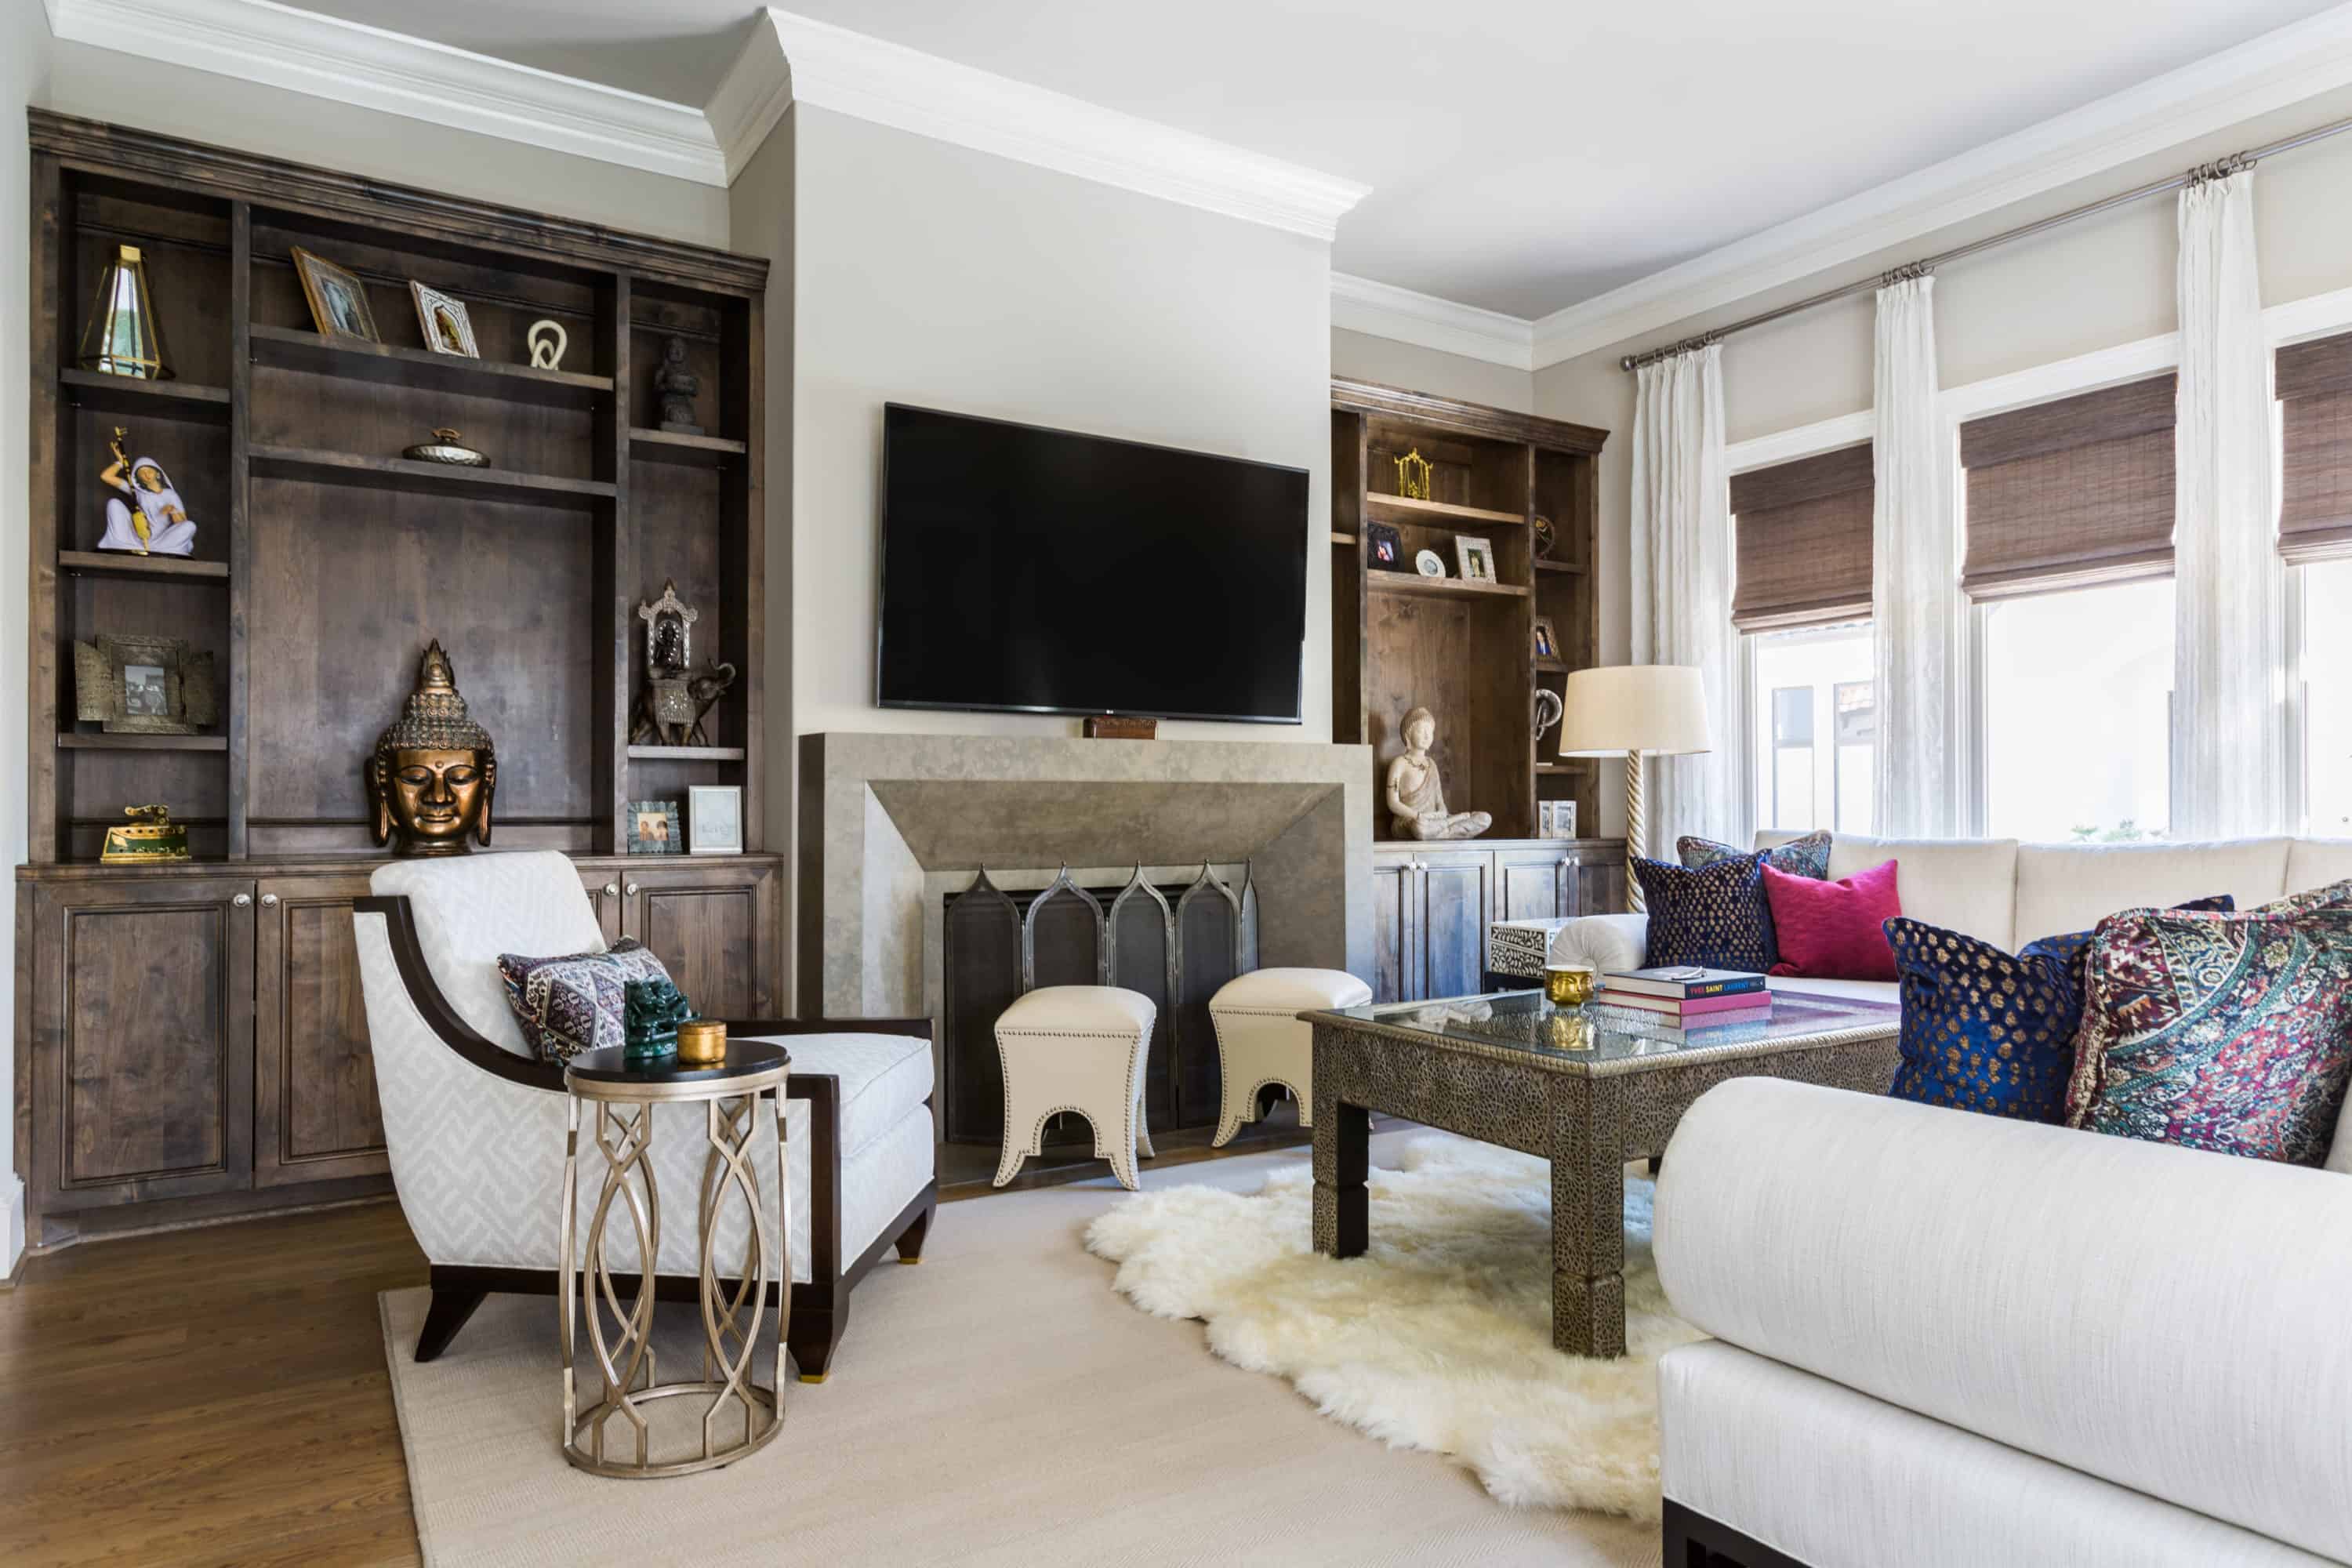 Kelly Chair from Century Furniture creates a cozy seating arrangement in this luxe living room